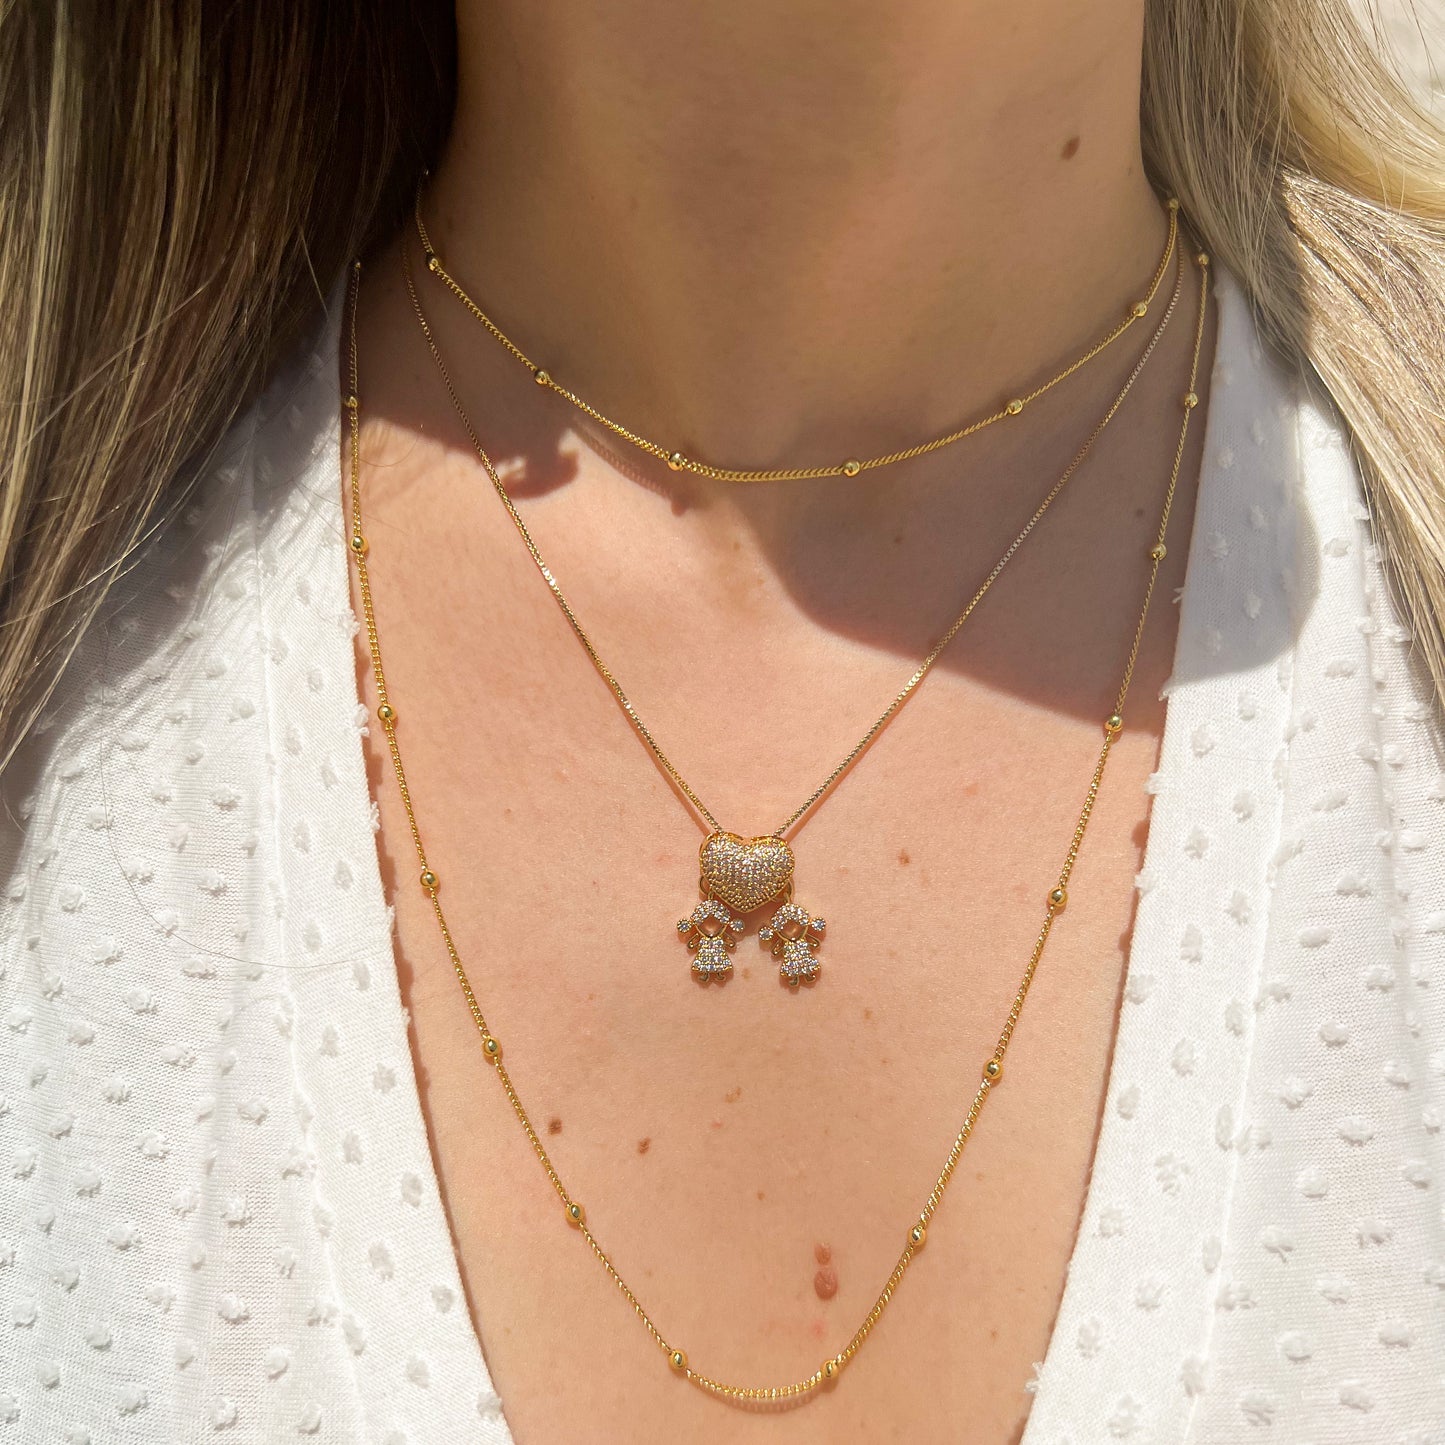 Little Balls Long Necklace Chain 24" Inches | 18k Gold Plated